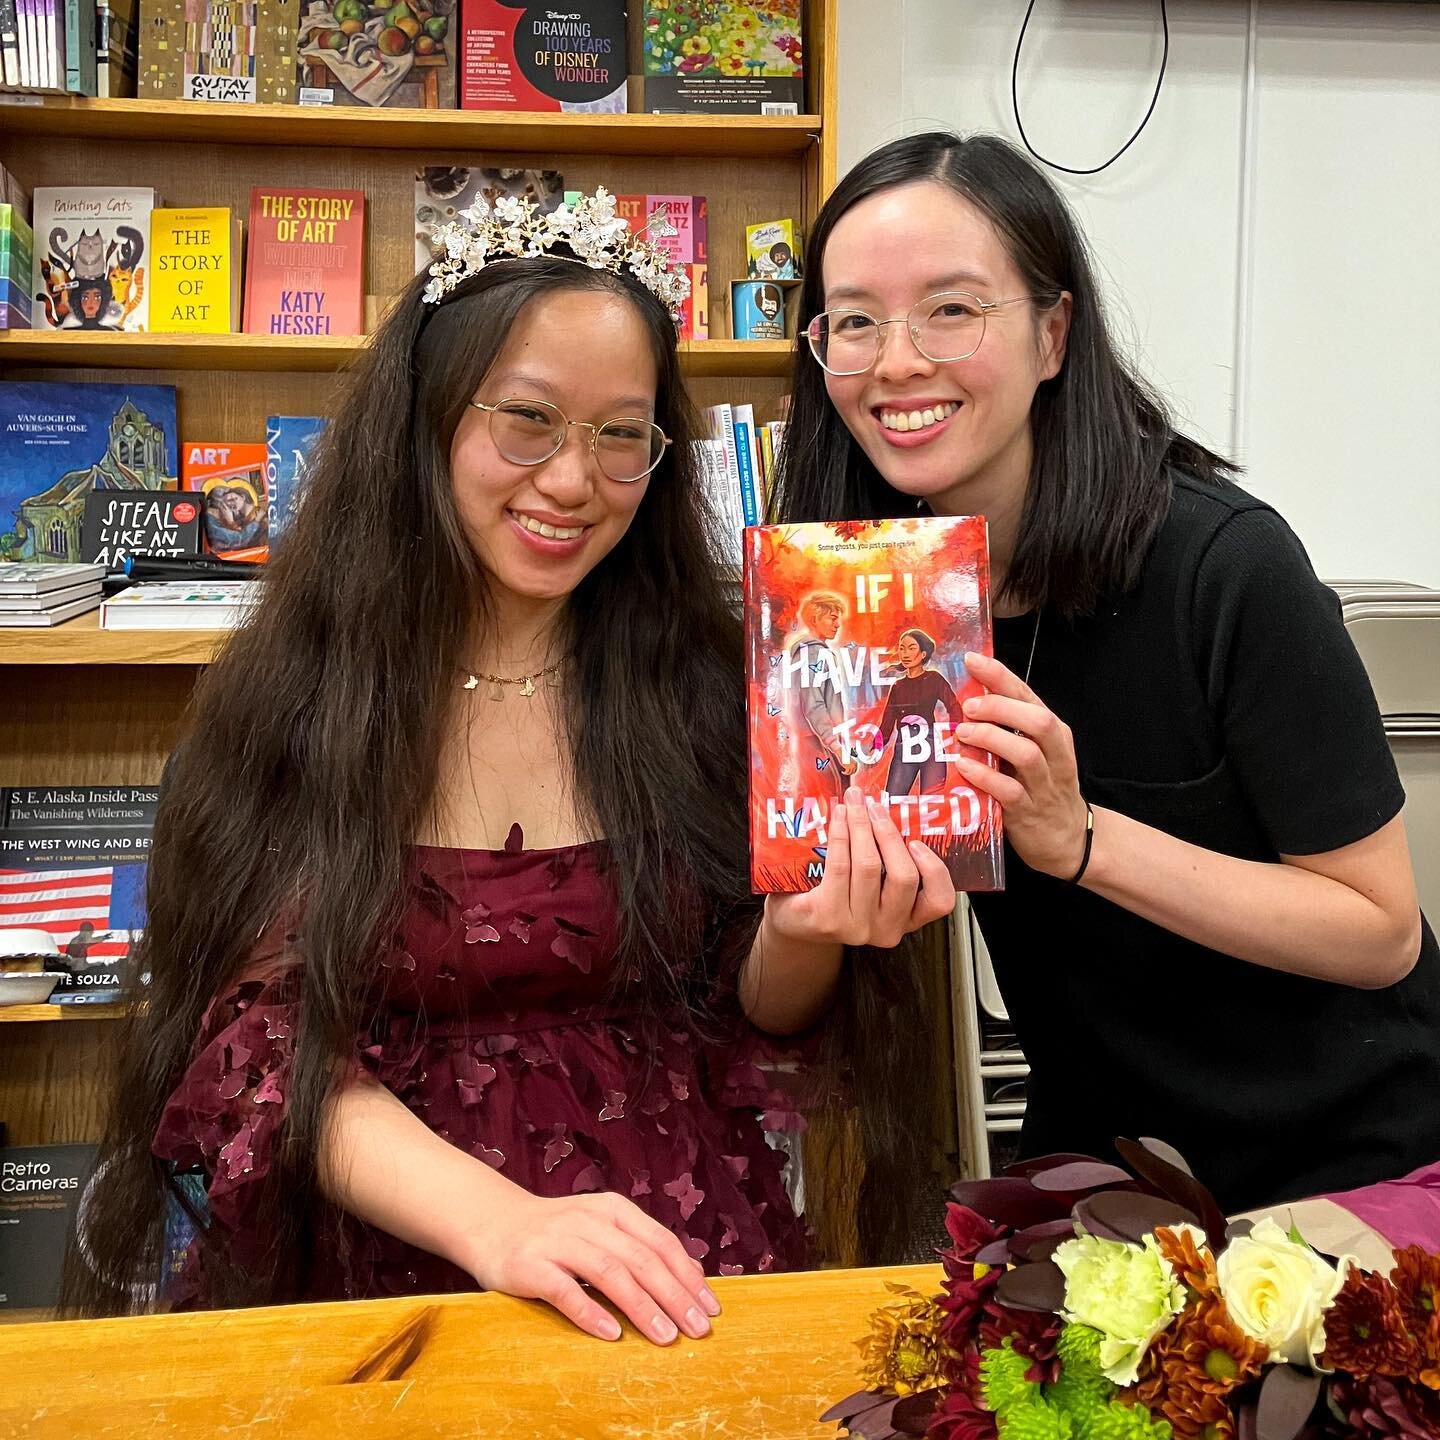 Congrats again to @themirandasun on her ghostly and spectacularly autumnal debut! So glad I could make it out on Sunday to @andersonsbookshop (my first time!) to listen to the thoughtful panel discussion with @joanhewrites and @rileyredgate and witne